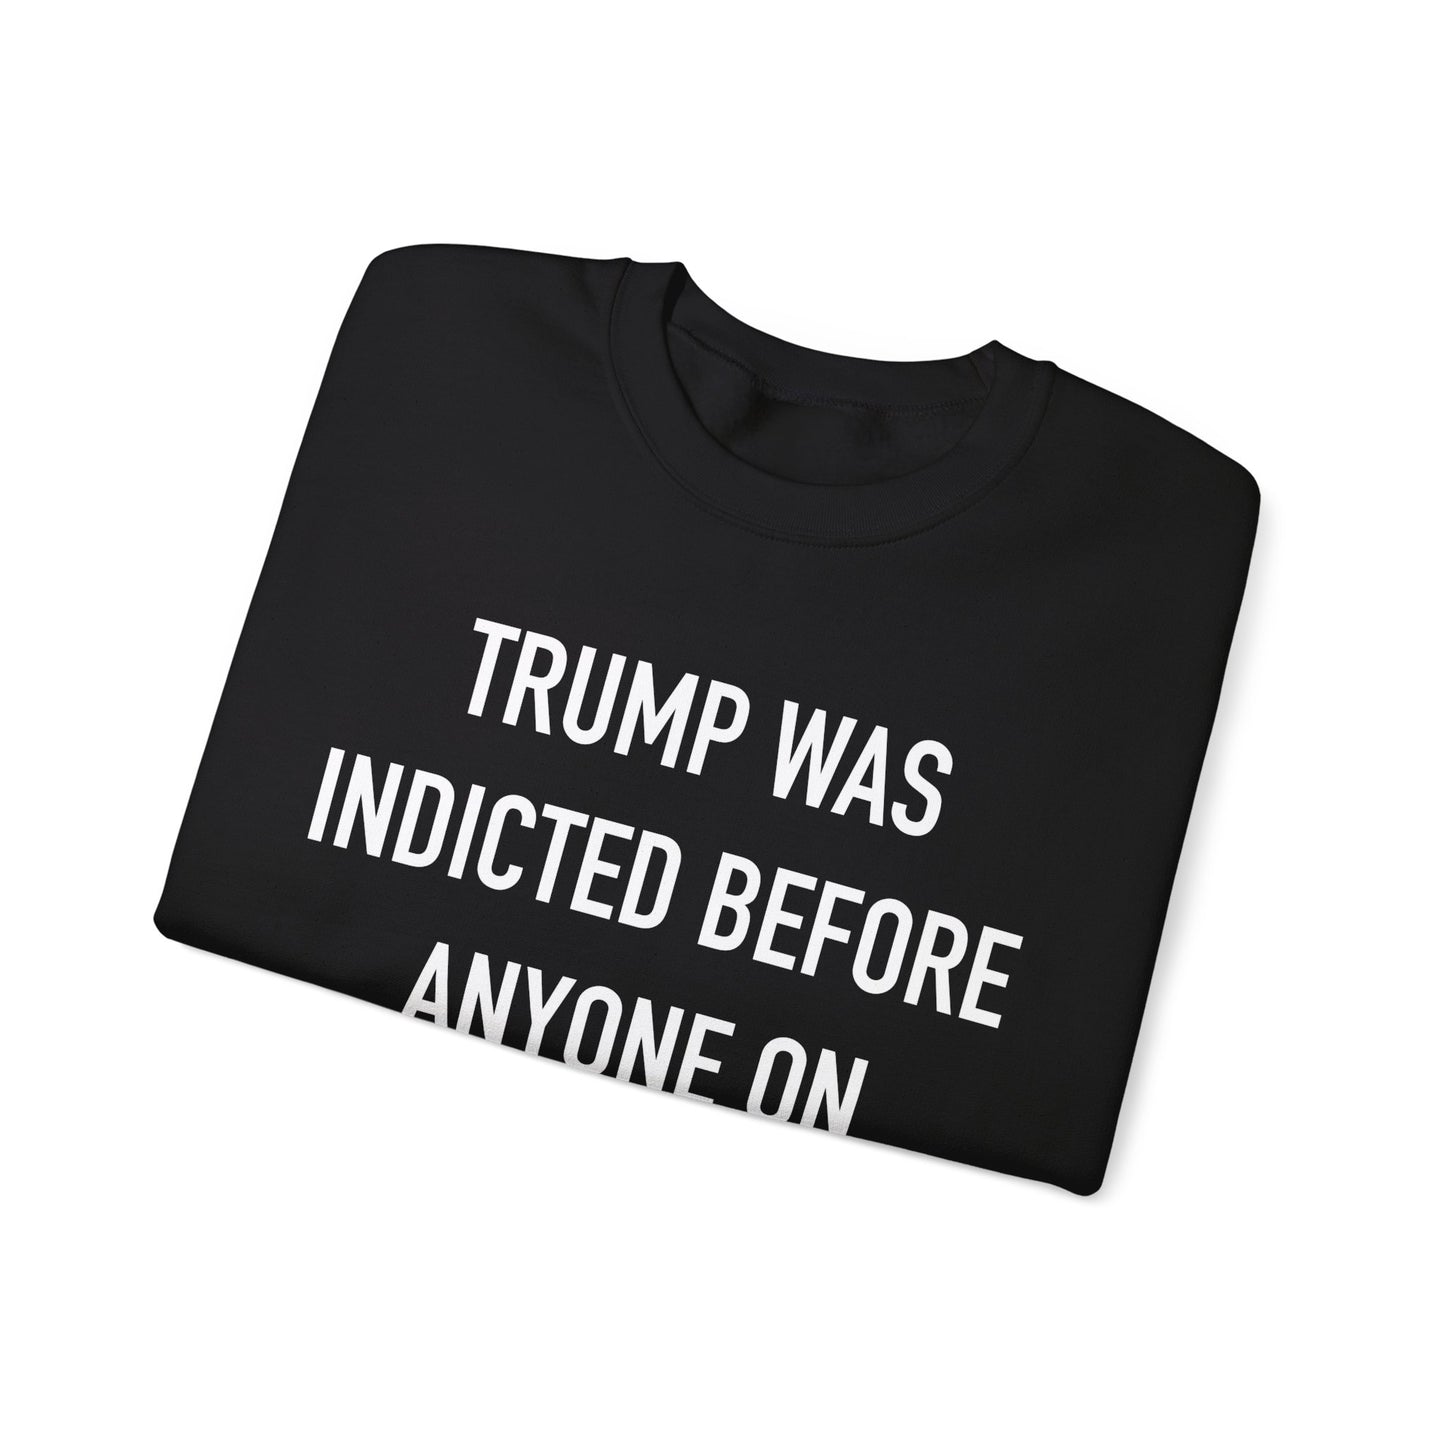 Trump Indicted Before Epstein